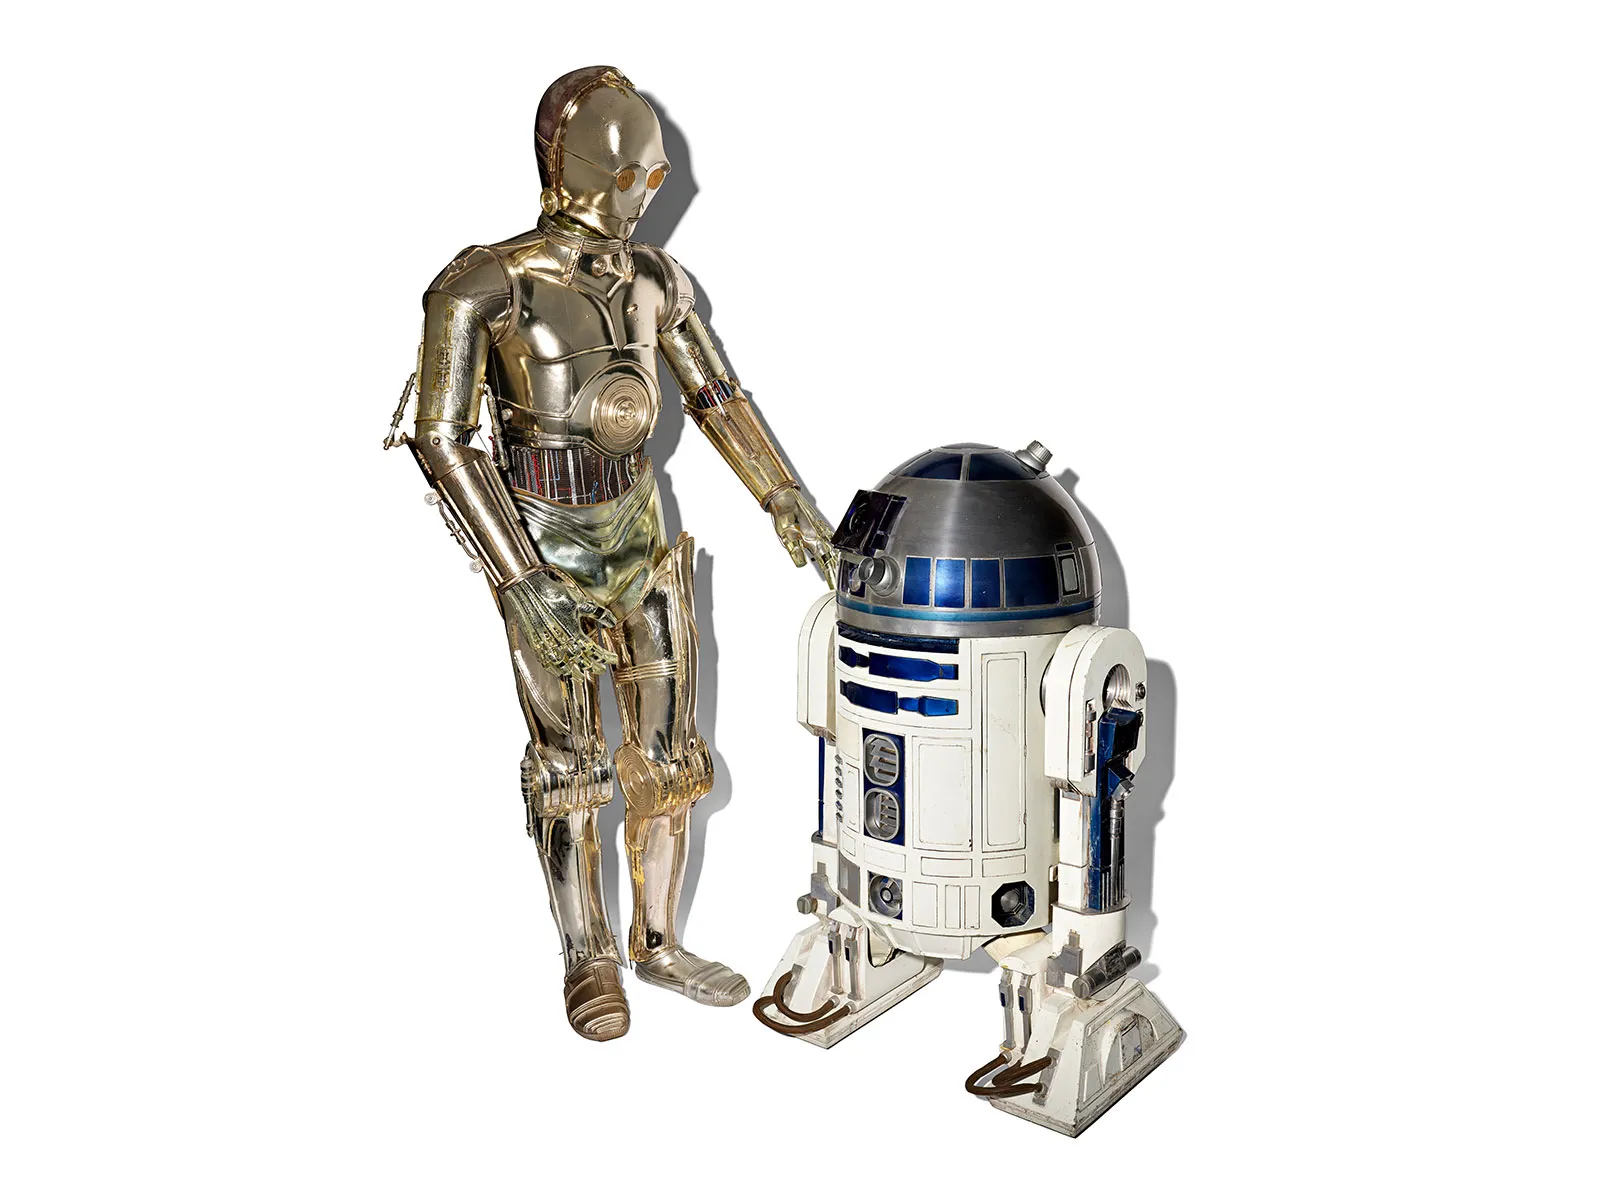 Picture Of C3po And R2d2 gets dicked